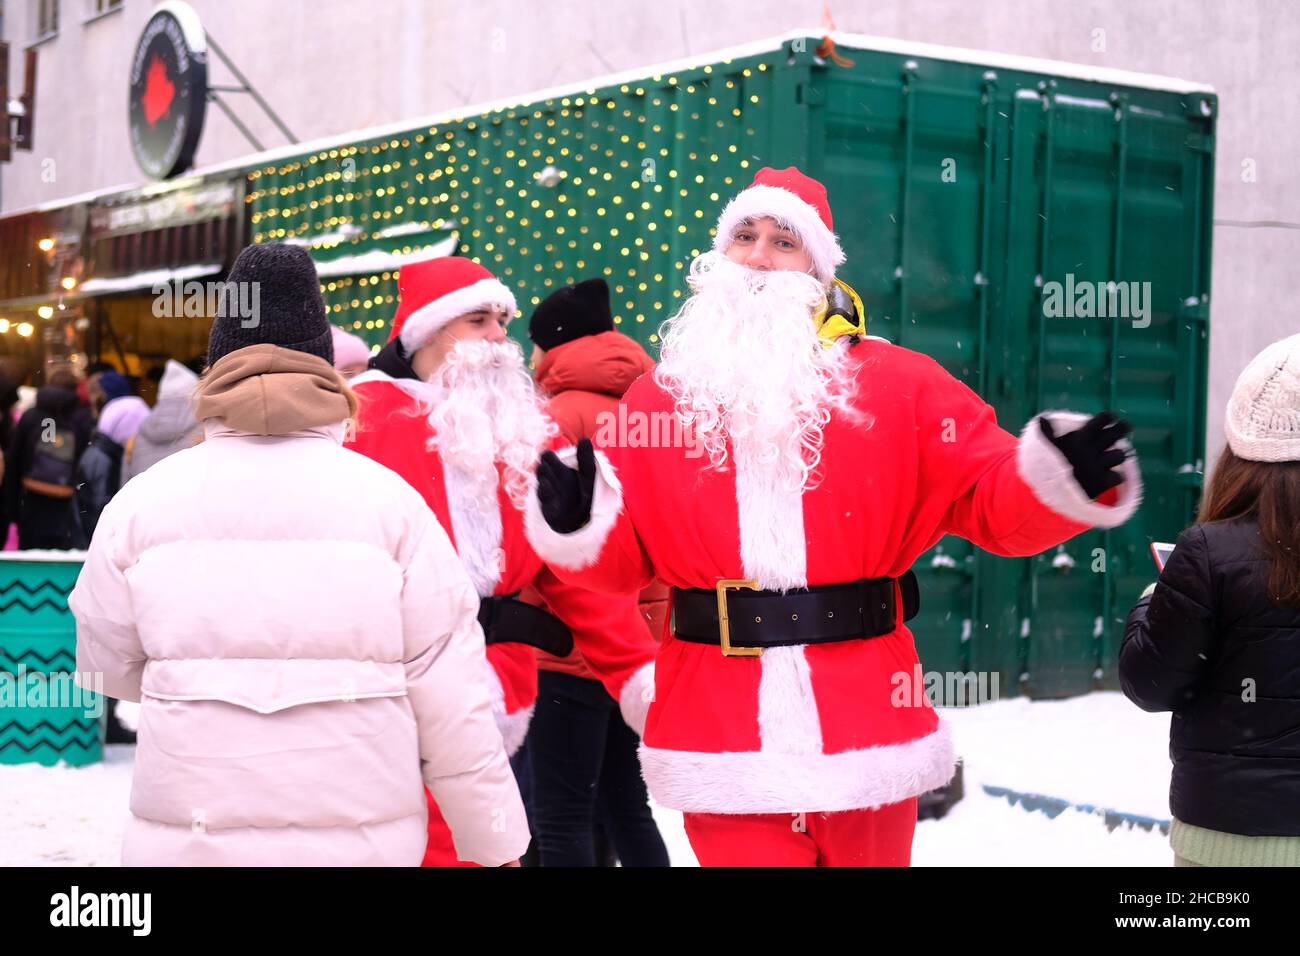 Minsk, Belarus, December 25, 2021: Two Santa Claus walk merrily among the people at the New Year's fair. Stock Photo